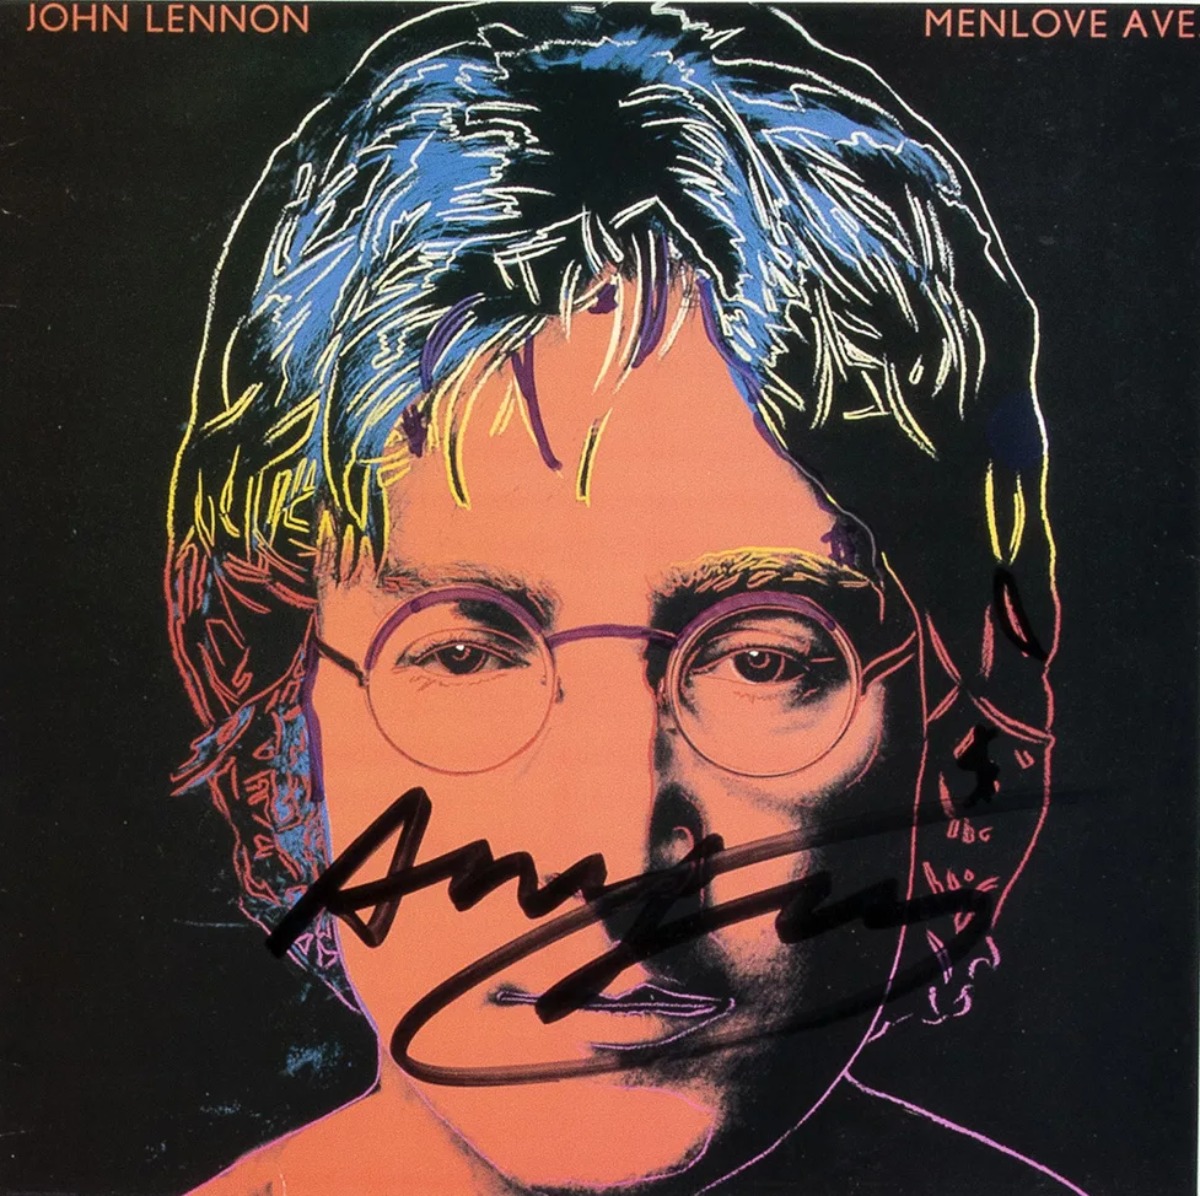 The cover of John Lennon's posthumous album Menlove Ave. signed by Warhol